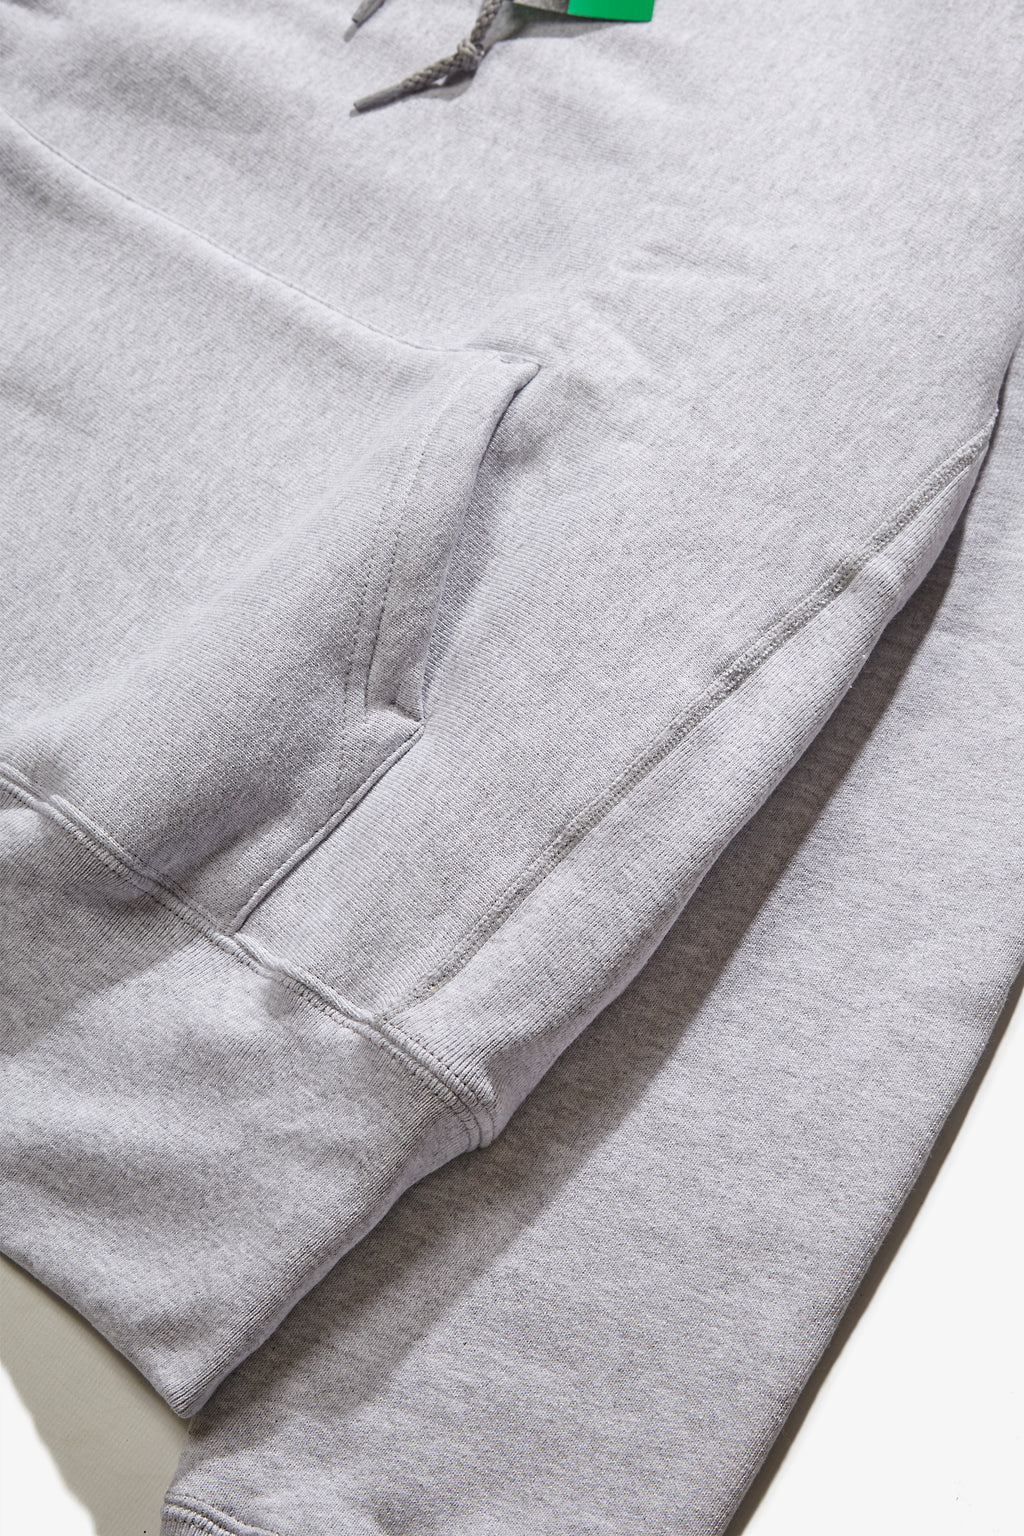 Camber USA - 232 12oz Pullover Hoodie - Ash Grey